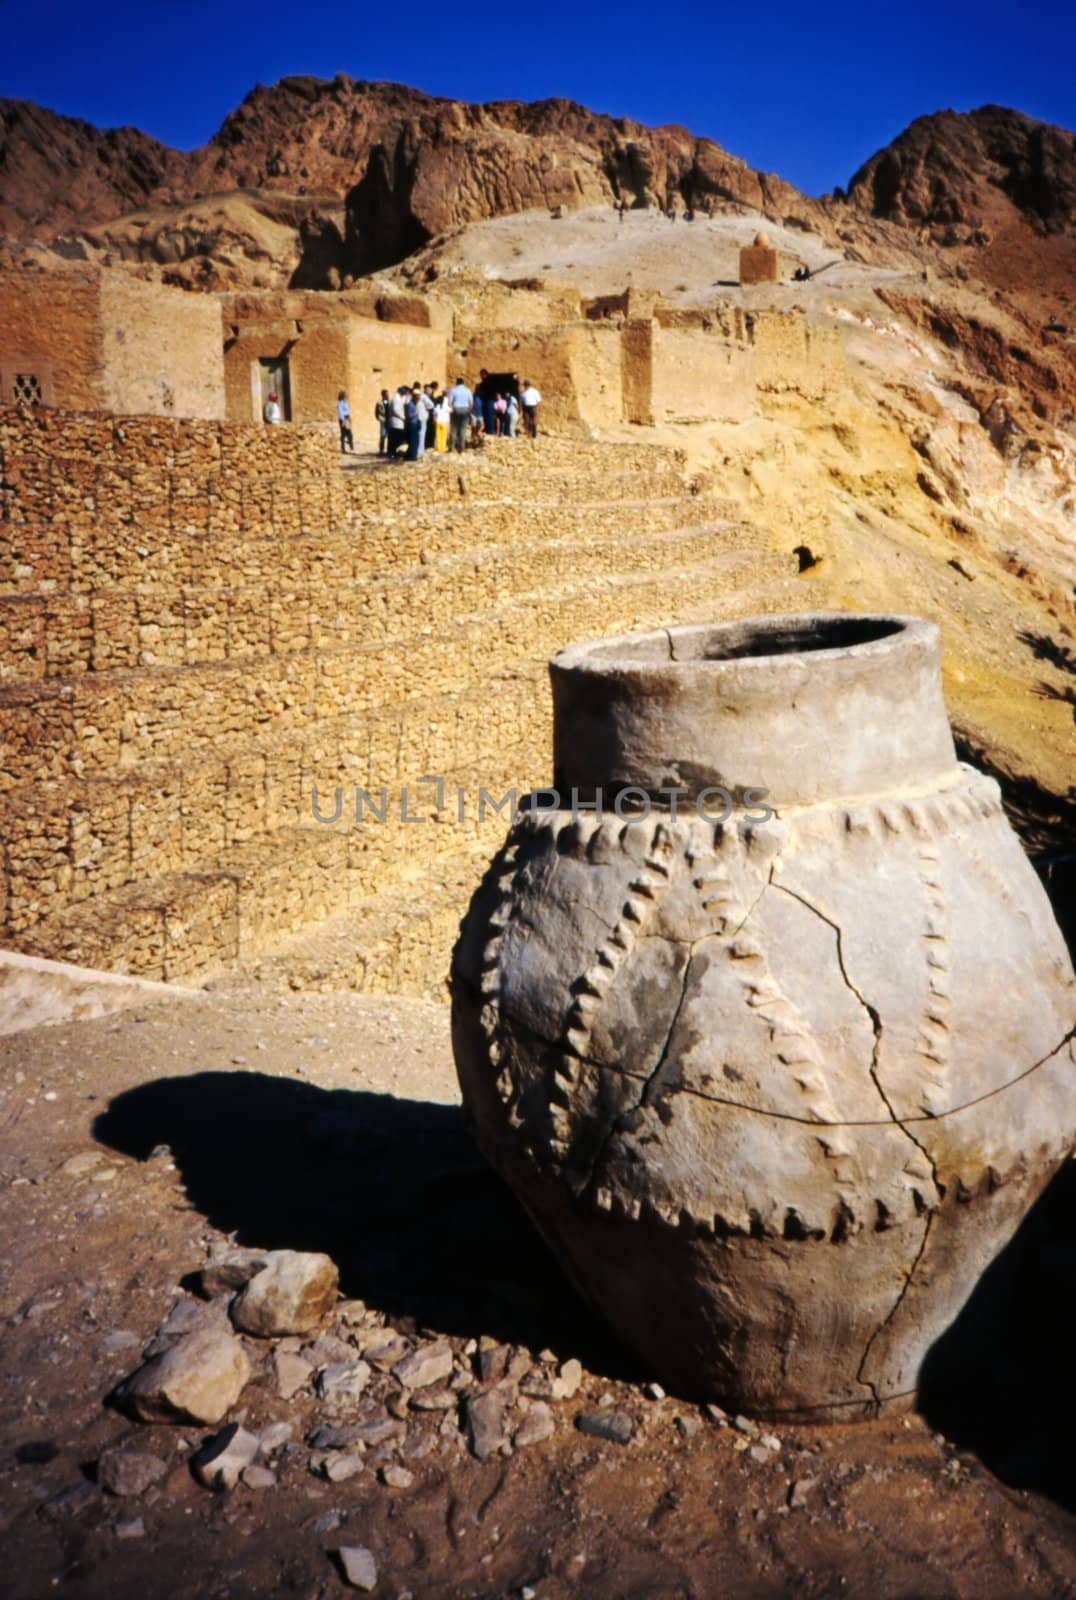 Tunisian vase with desert, tourists and ruins in the background